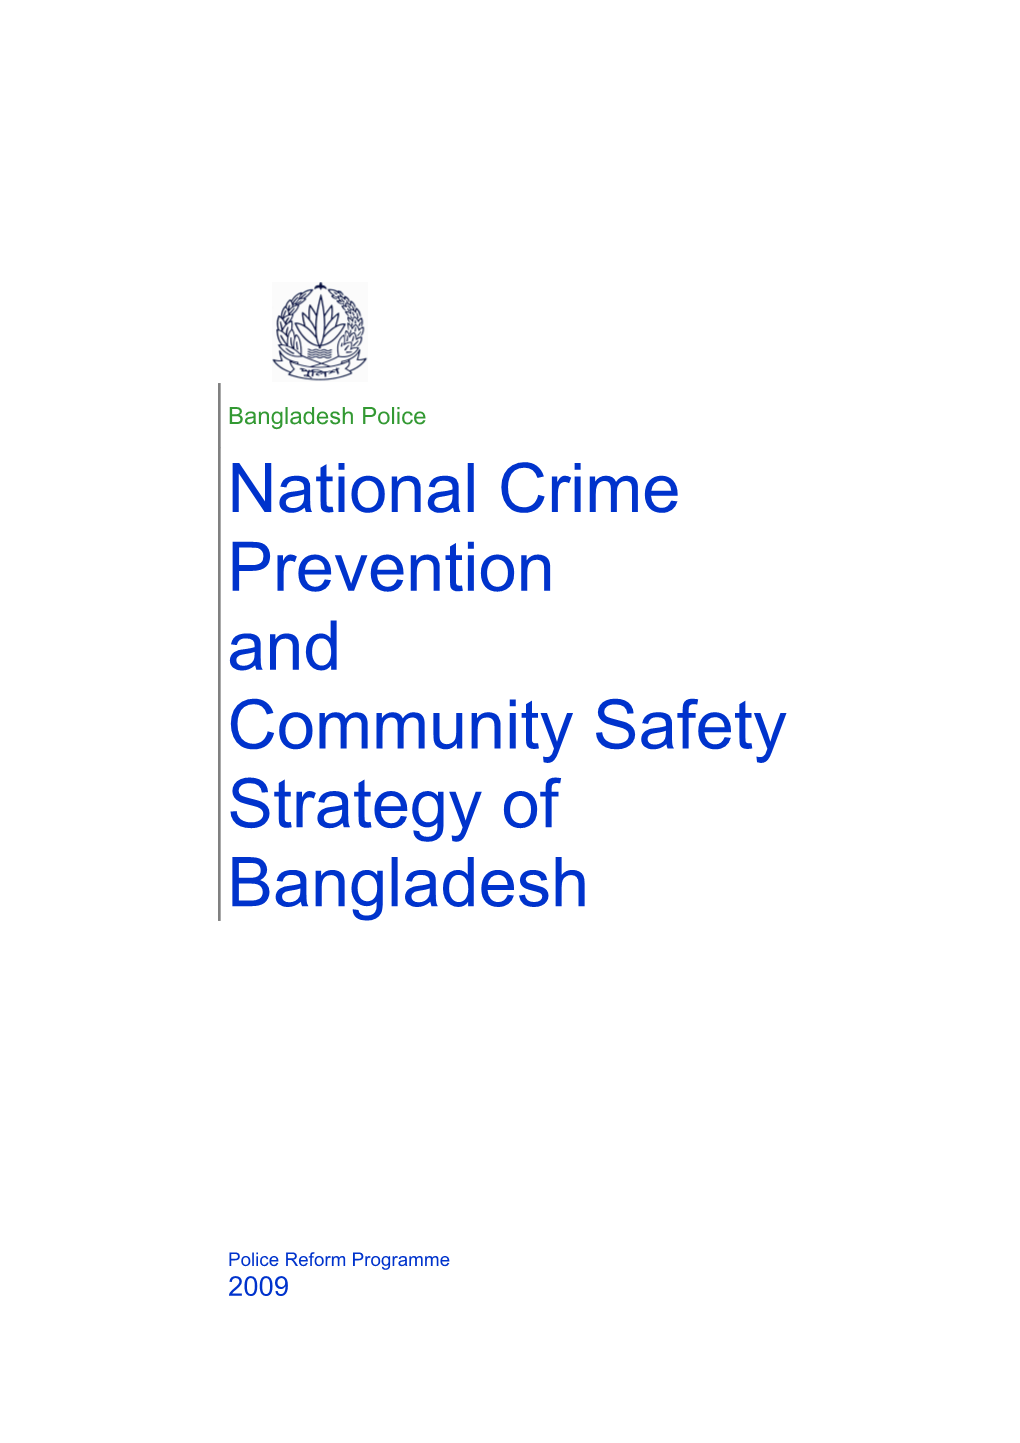 National Crime Prevention and Community Safety Strategy of Bangladesh